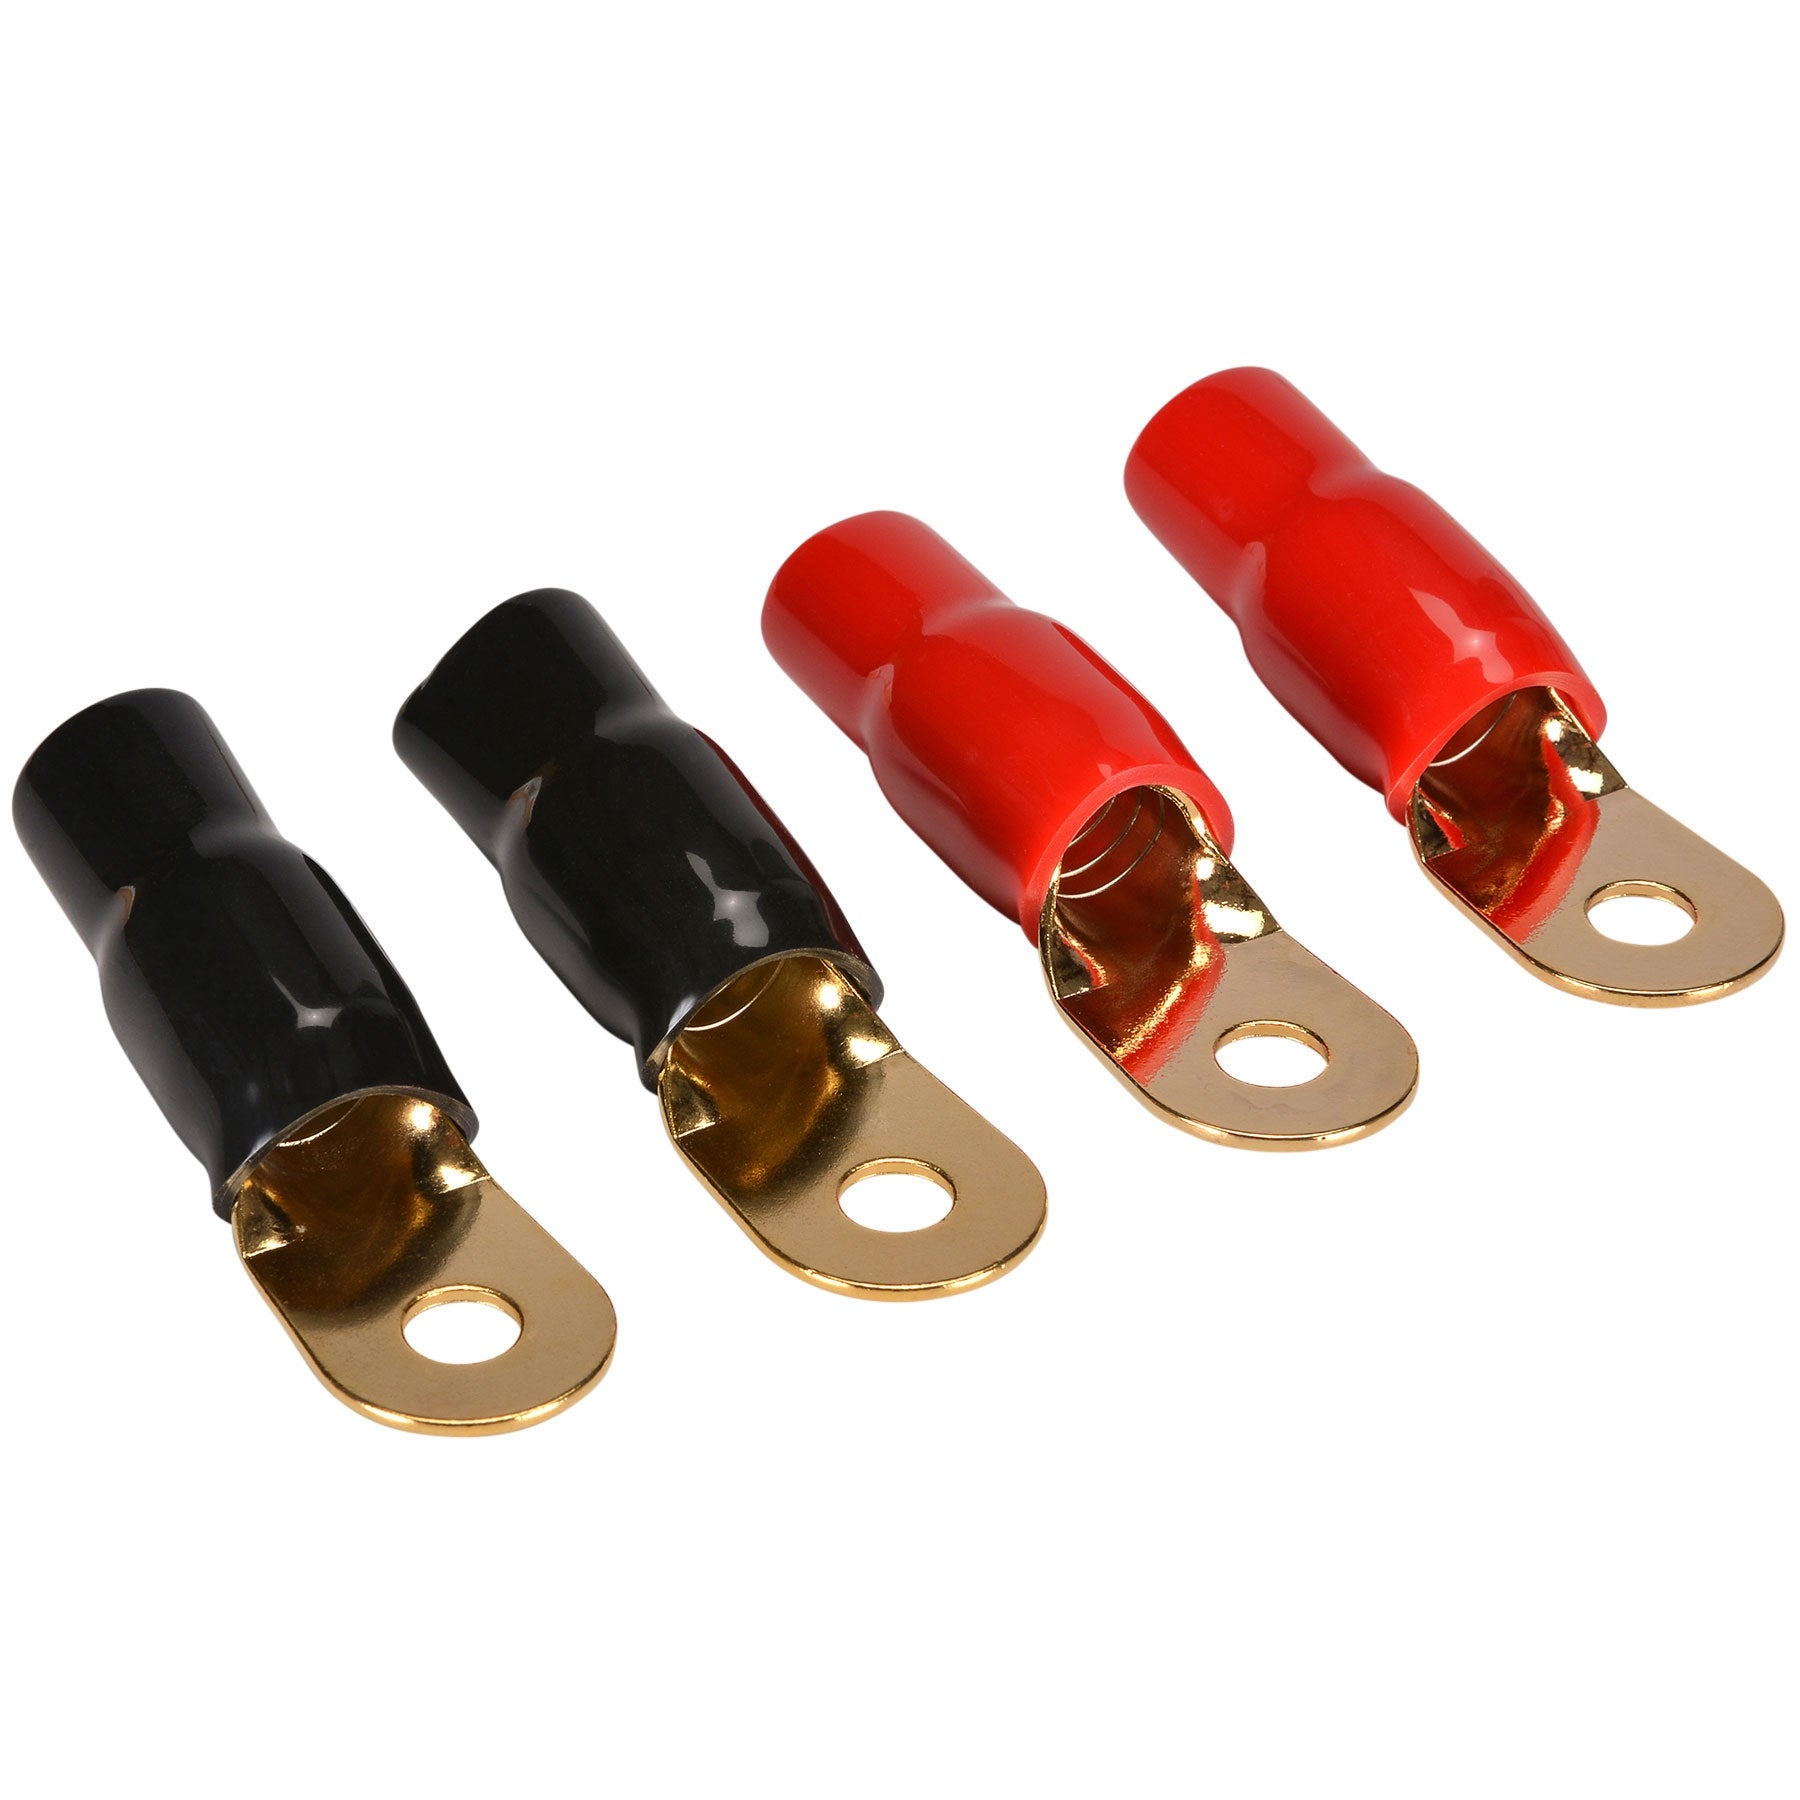 86-0010-XX Insulated Wire Cable Round Terminal Connectors Gold For 8 or 10 AWG